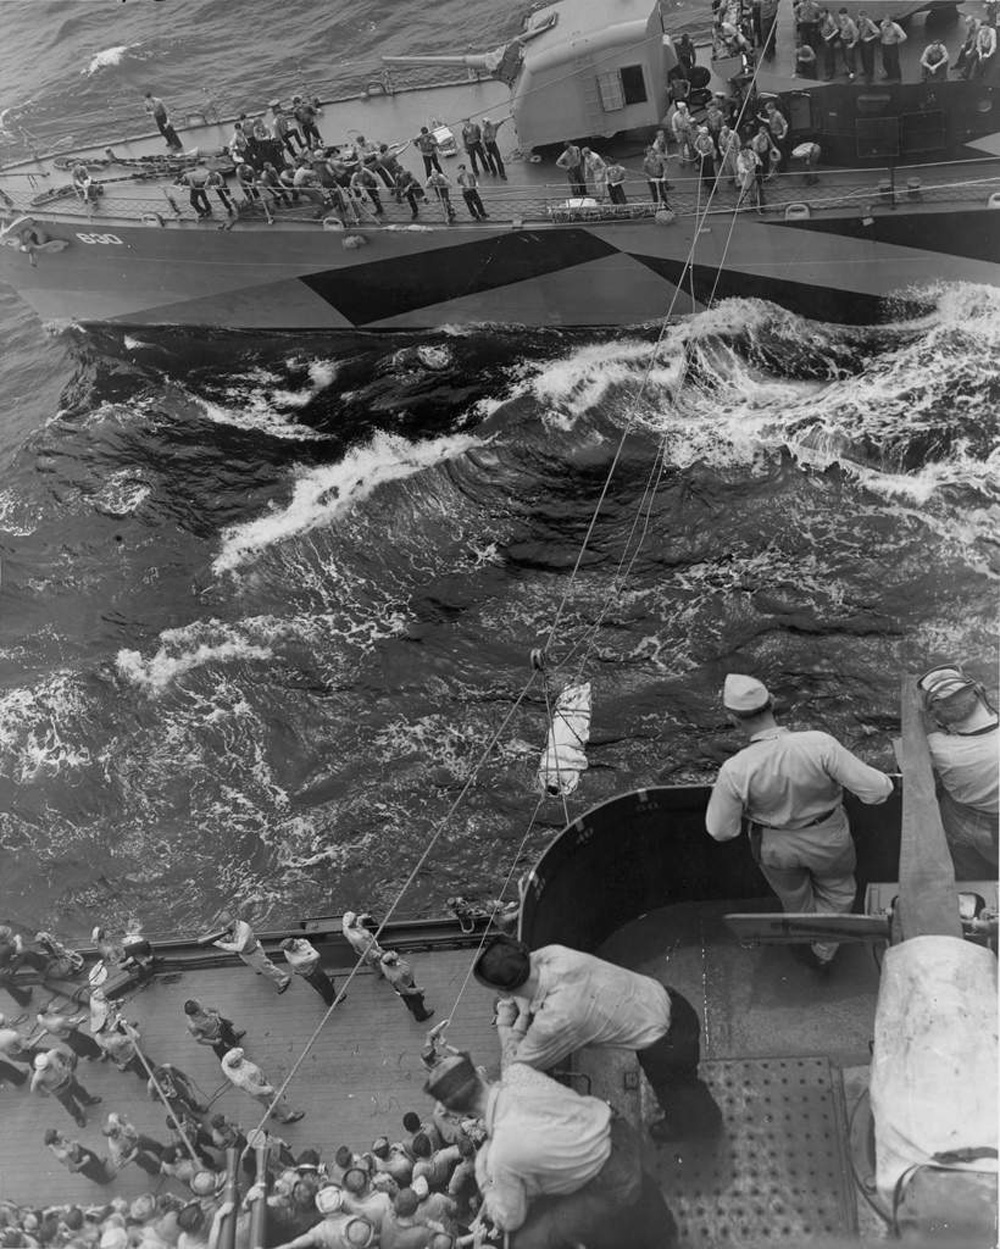 USS Braine transferring wounded to USS New Mexico, 14 Jun 1944